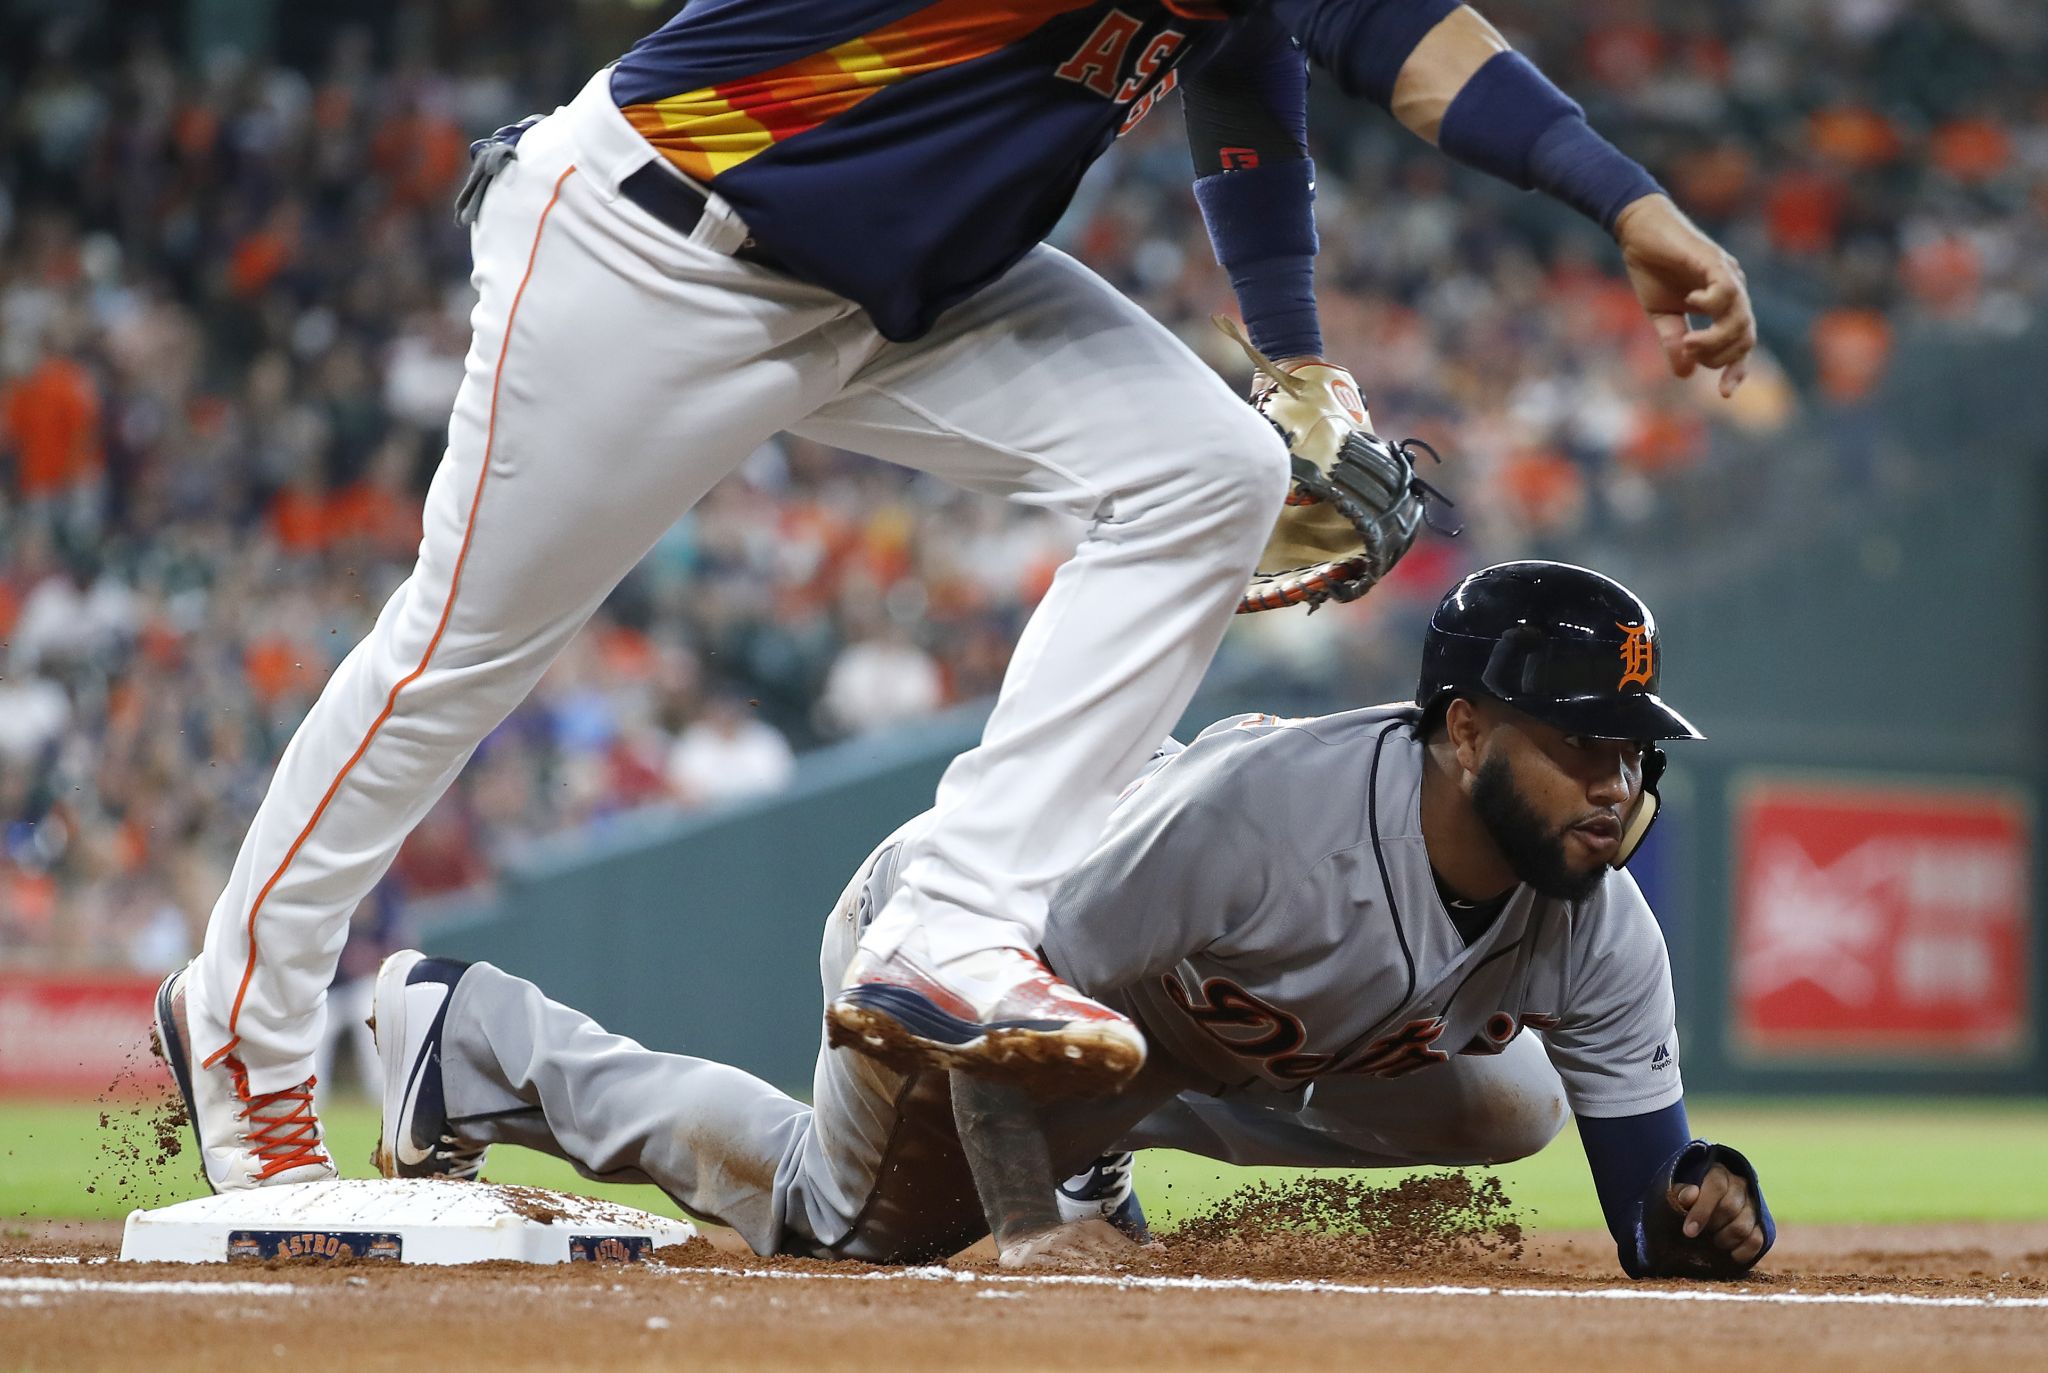 6-3 loss to Tigers 'weird' for Astros ace Justin Verlander